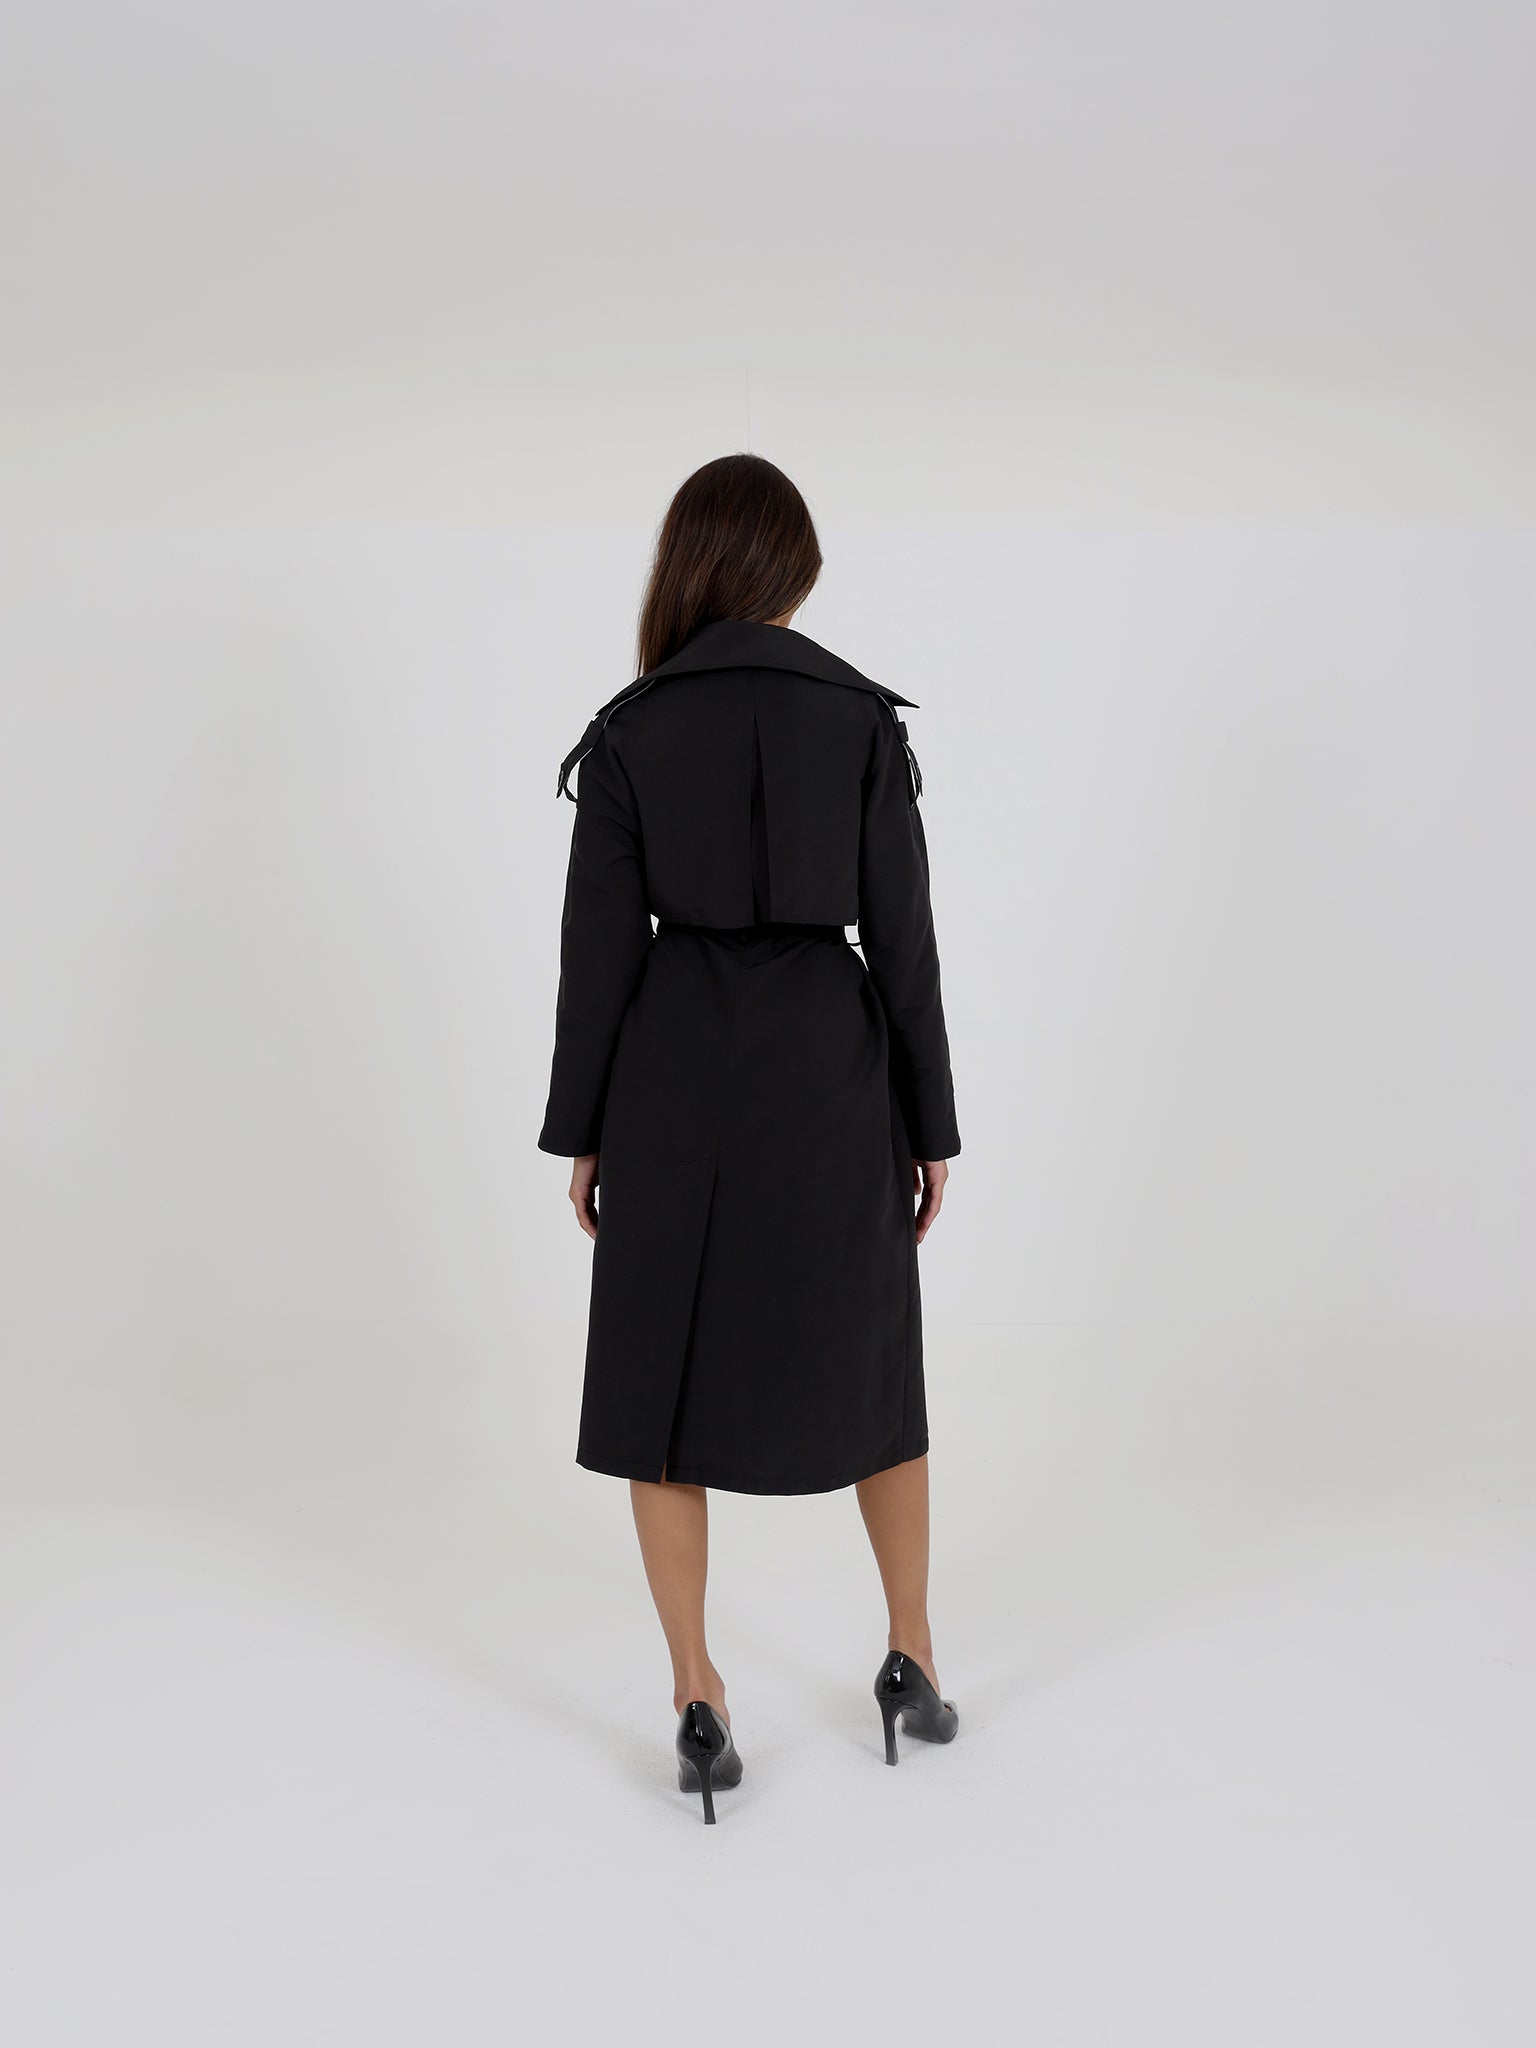 Trench Coat With Belt And Details Inside